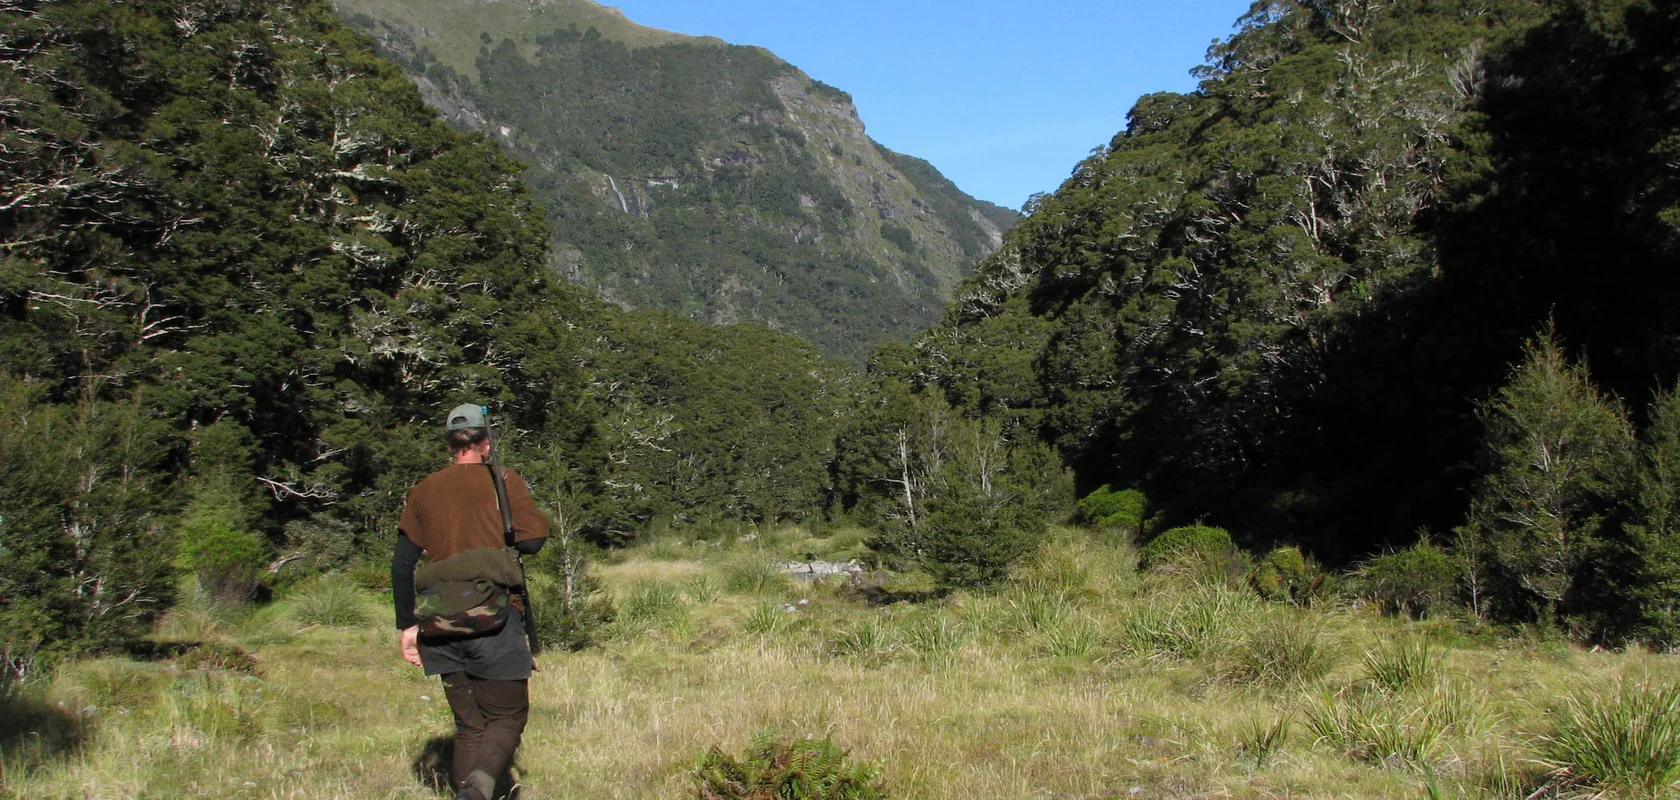 Man walking with Hunting gear deep into Fiordland National Park